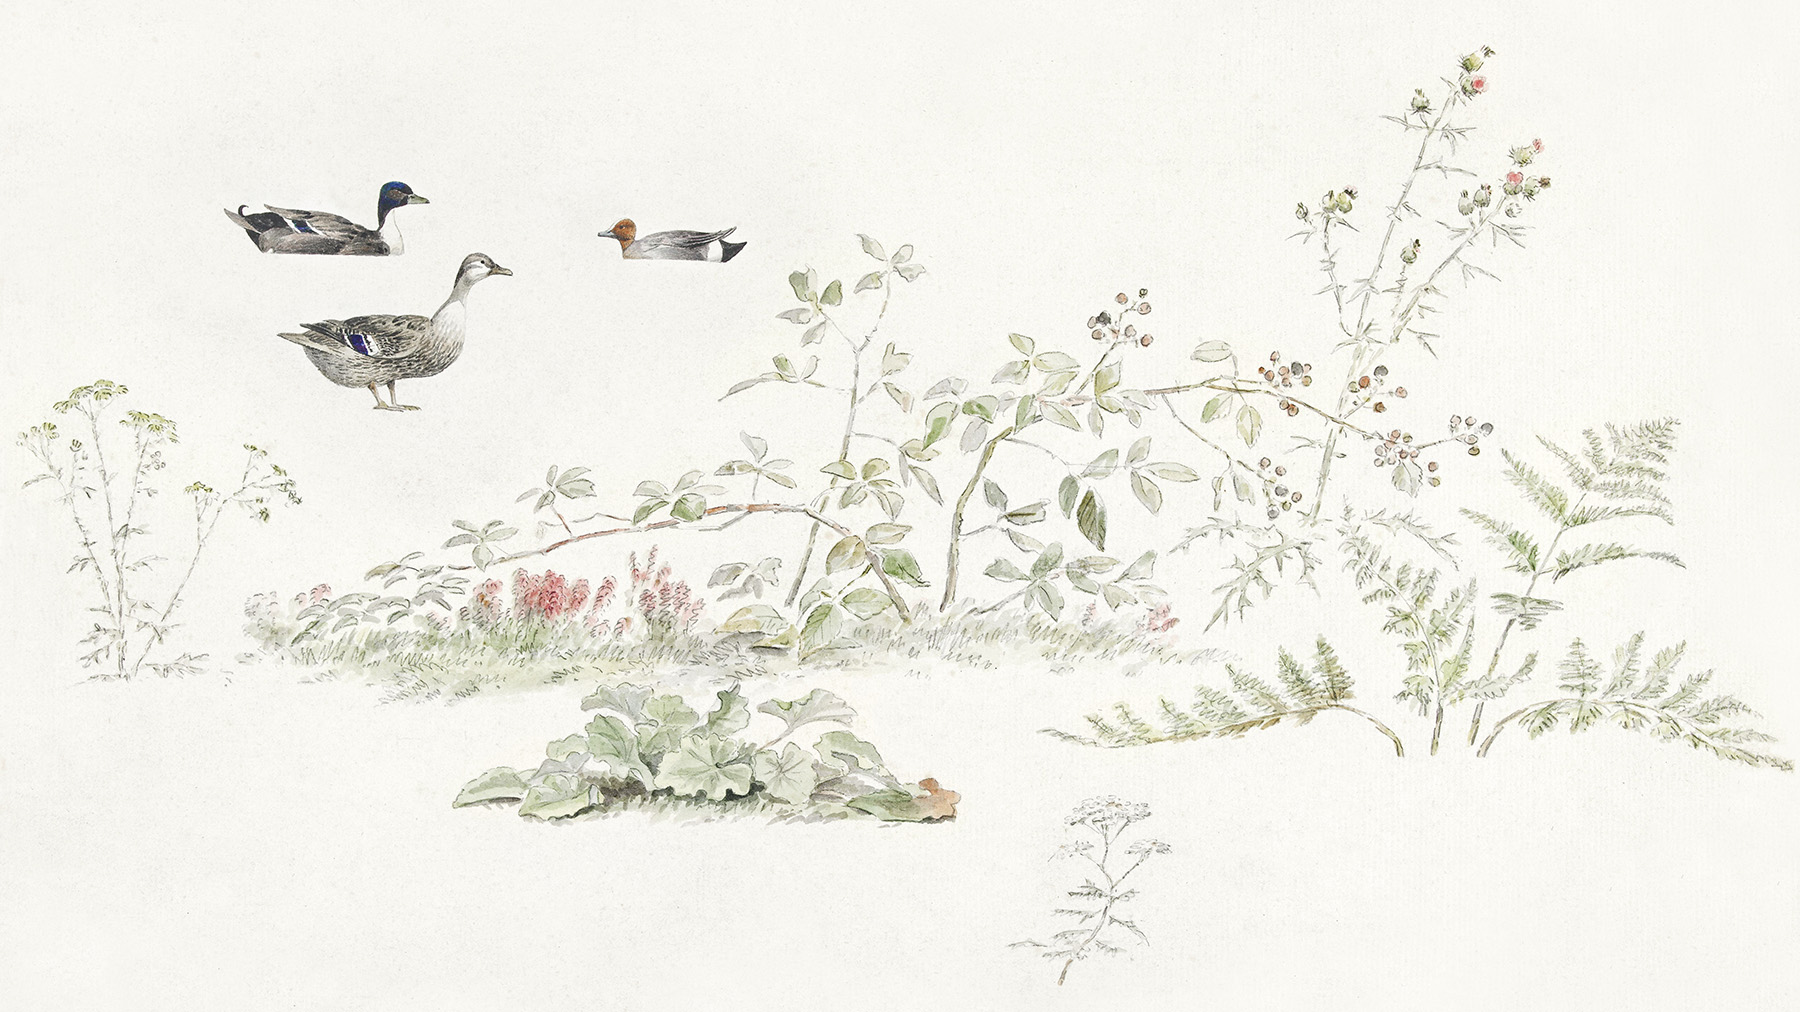 Watercolor image of plants, leaves, and ducks from Creative Commons (courtesy of RawPixel.com)